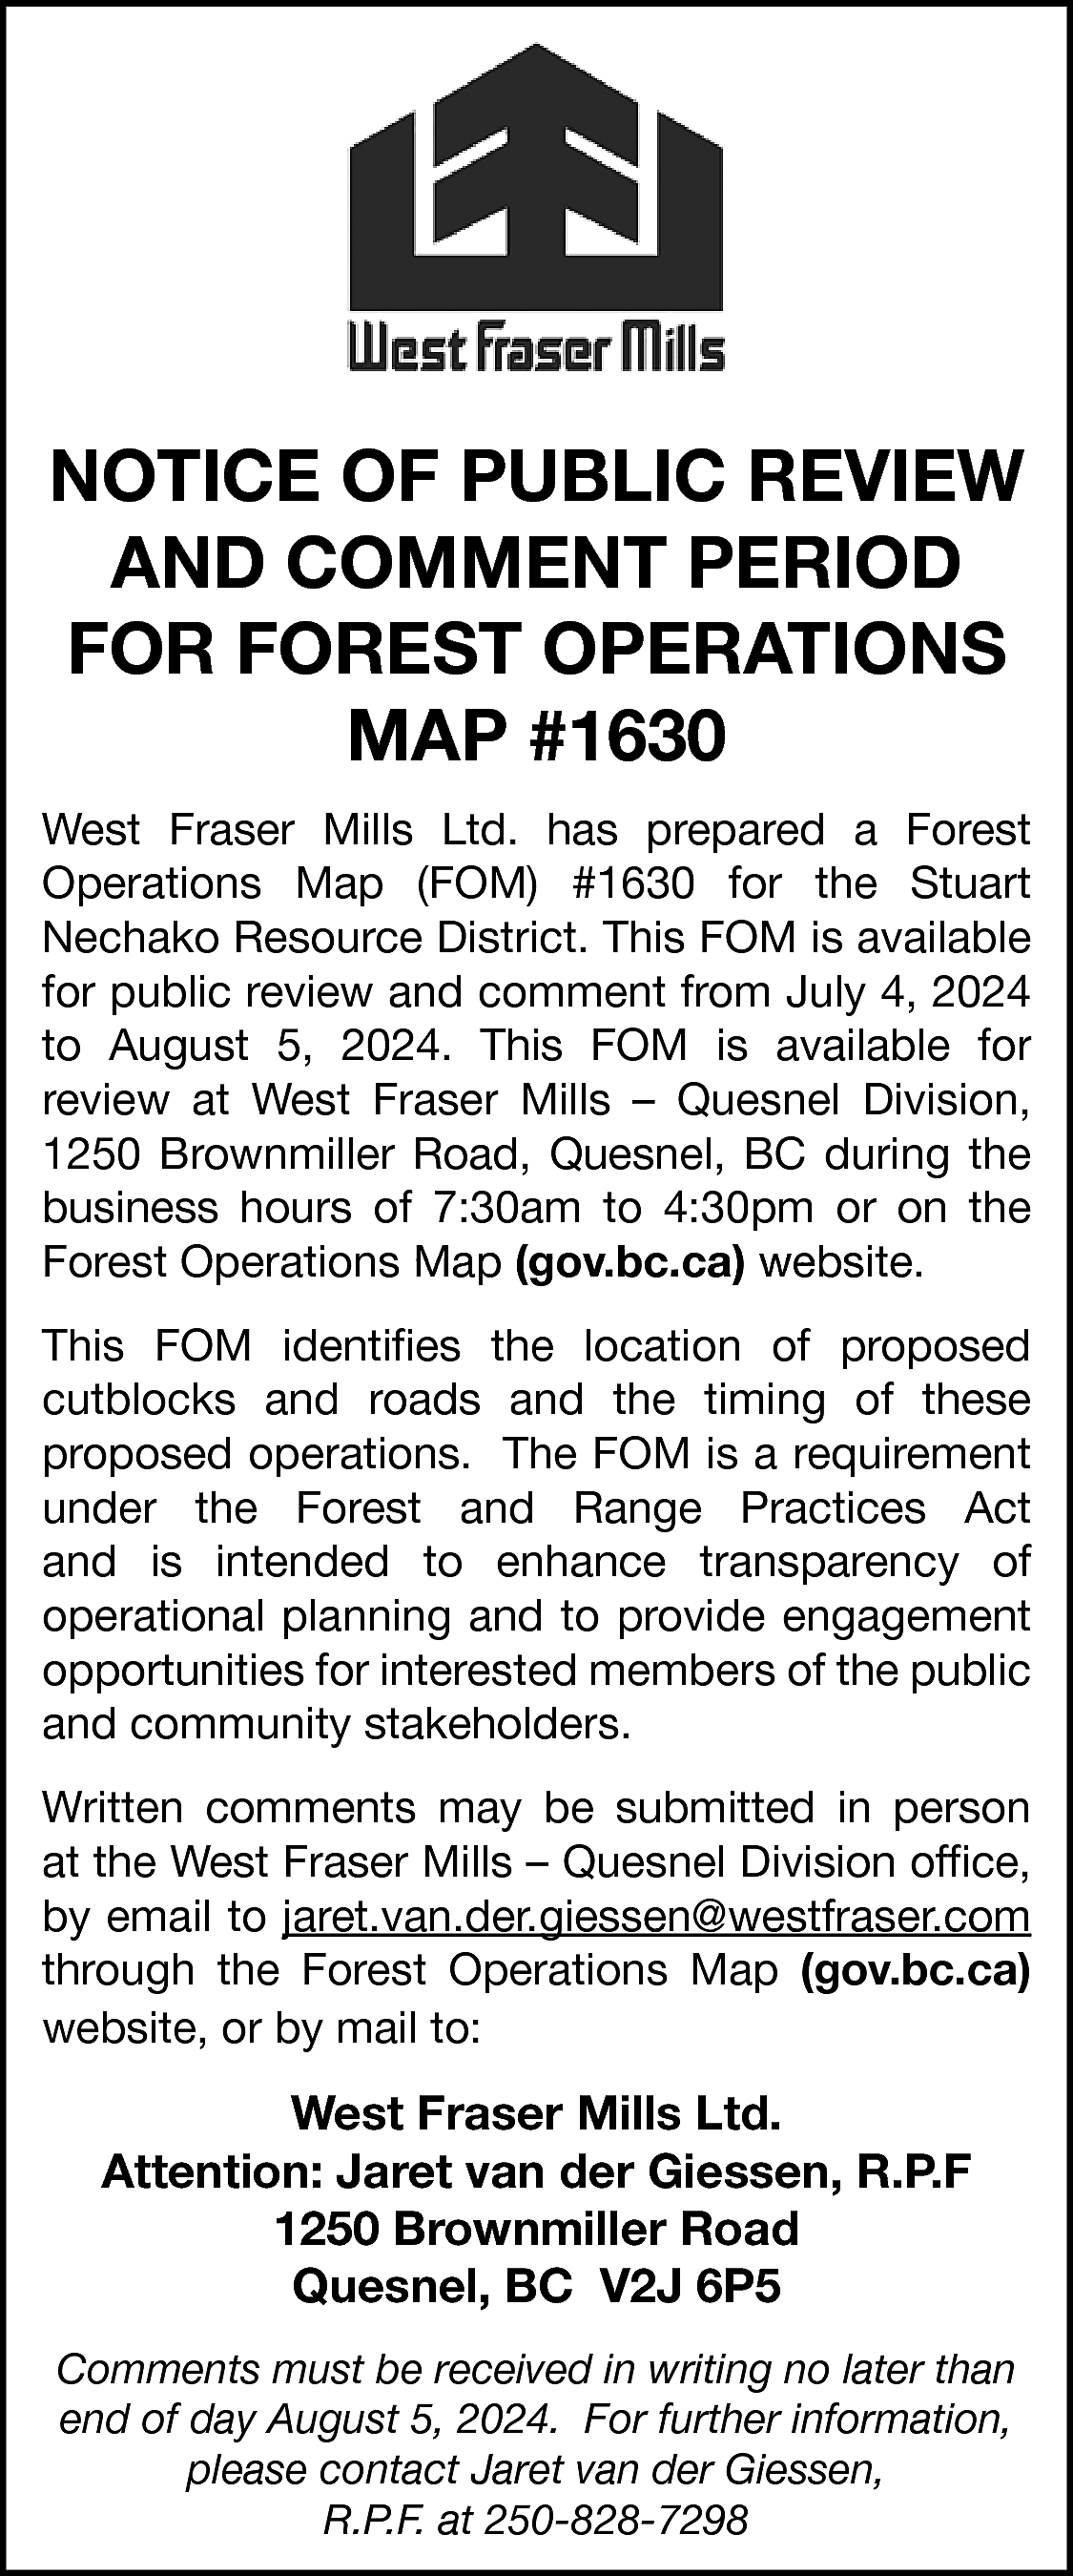 NOTICE OF PUBLIC REVIEW <br>AND  NOTICE OF PUBLIC REVIEW  AND COMMENT PERIOD  FOR FOREST OPERATIONS  MAP #1630  West Fraser Mills Ltd. has prepared a Forest  Operations Map (FOM) #1630 for the Stuart  Nechako Resource District. This FOM is available  for public review and comment from July 4, 2024  to August 5, 2024. This FOM is available for  review at West Fraser Mills – Quesnel Division,  1250 Brownmiller Road, Quesnel, BC during the  business hours of 7:30am to 4:30pm or on the  Forest Operations https://www2.gov.bc.ca/gov/content/home  Map (gov.bc.ca) website.  This FOM identifies the location of proposed  cutblocks and roads and the timing of these  proposed operations. The FOM is a requirement  under the Forest and Range Practices Act  and is intended to enhance transparency of  operational planning and to provide engagement  opportunities for interested members of the public  and community stakeholders.    Written comments may be submitted in person  at the West Fraser Mills – Quesnel Division office,  by email to jaret.van.der.giessen@westfraser.com  https://www2.gov.bc.ca/gov/content/h  through the Forest Operations Map (gov.bc.ca)  website, or by mail to:    West Fraser Mills Ltd.  Attention: Jaret van der Giessen, R.P.F  1250 Brownmiller Road  Quesnel, BC V2J 6P5  Comments must be received in writing no later than  end of day August 5, 2024. For further information,  please contact Jaret van der Giessen,  R.P.F. at 250-828-7298    